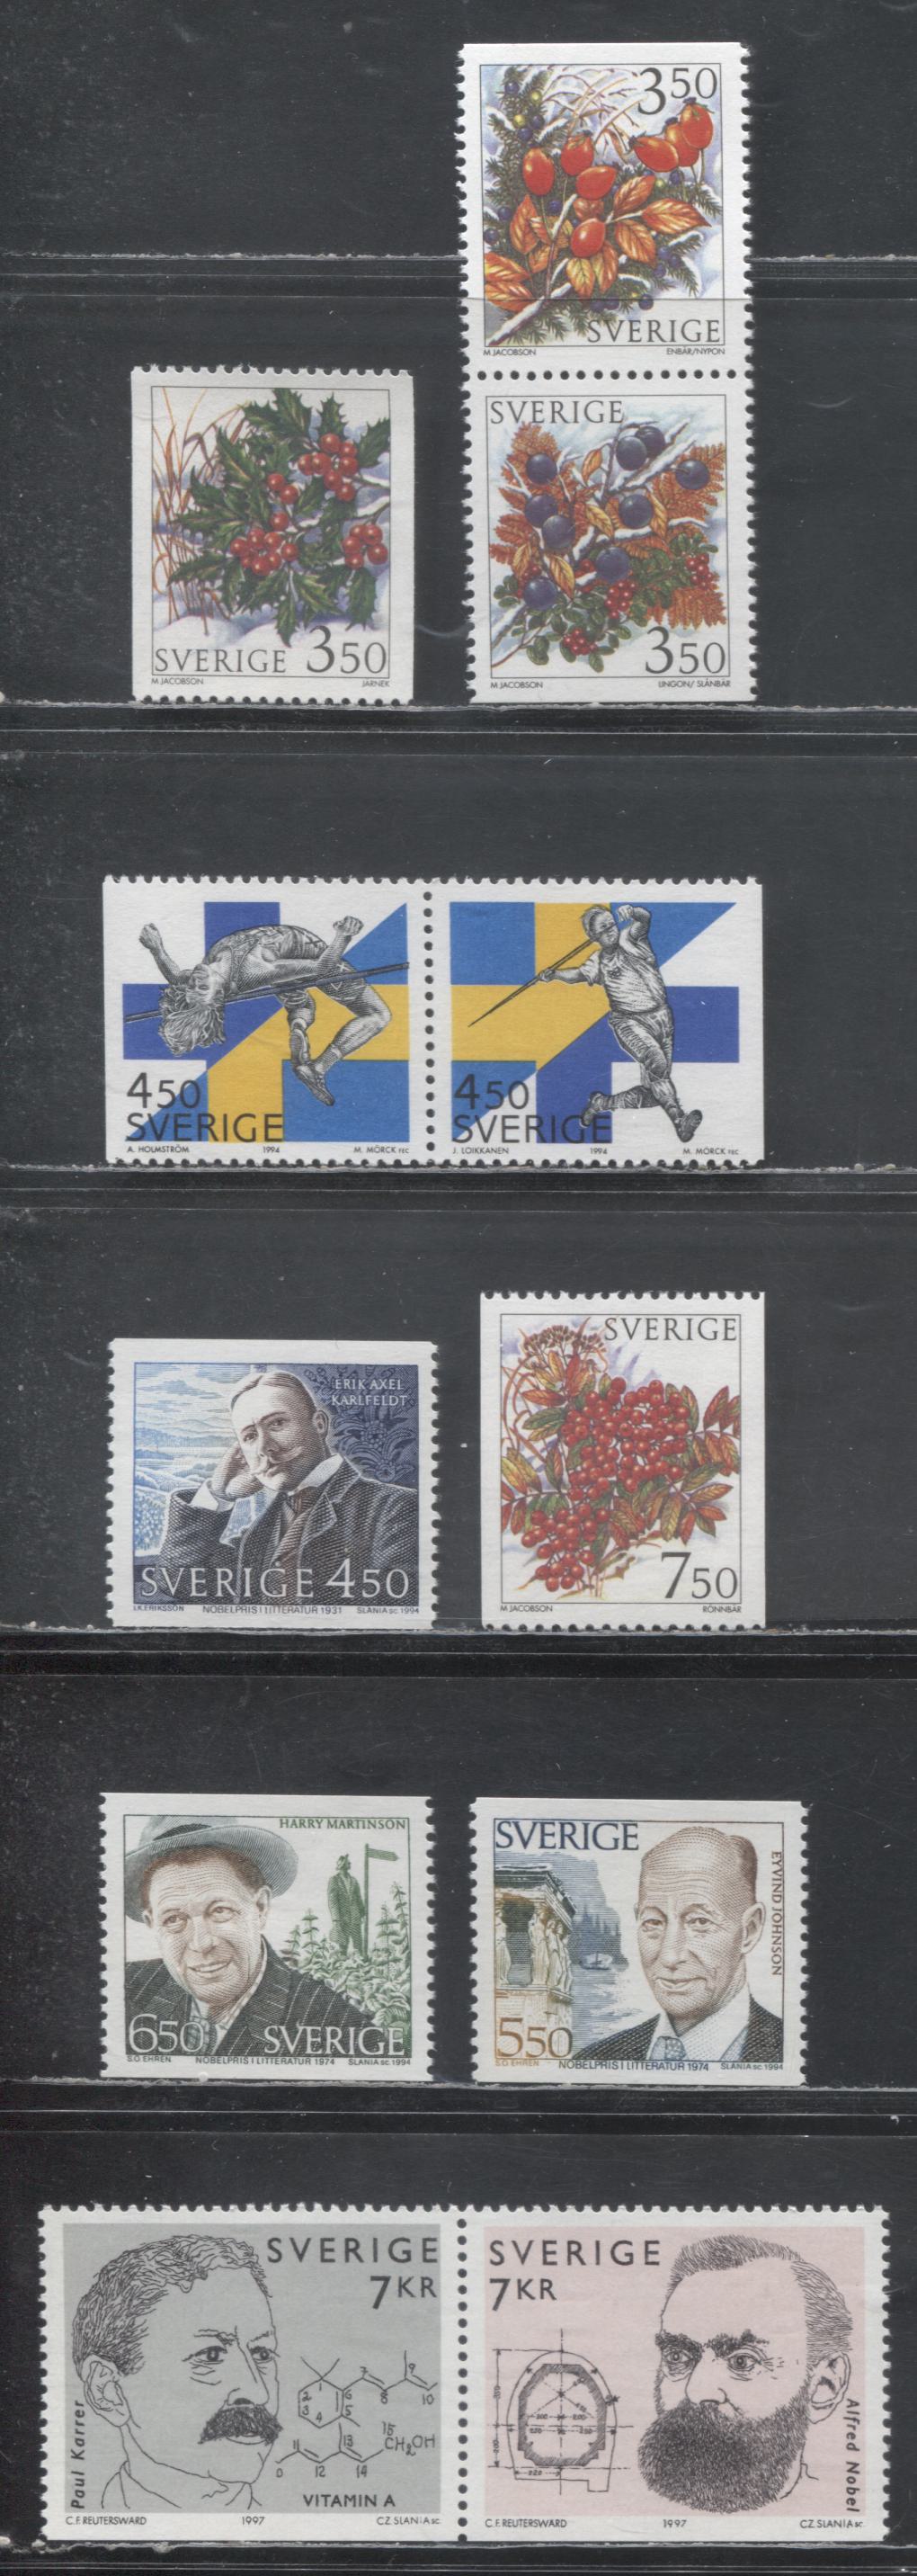 Lot 99 Sweden SC#2092a/2255 1994 Finland-Sweden Track & Field Meet - 1997 Nobel Prize Issues, 5 VFNH Singles, And Three Booklet Pairs, Click on Listing to See ALL Pictures, 2017 Scott Cat. $24.15